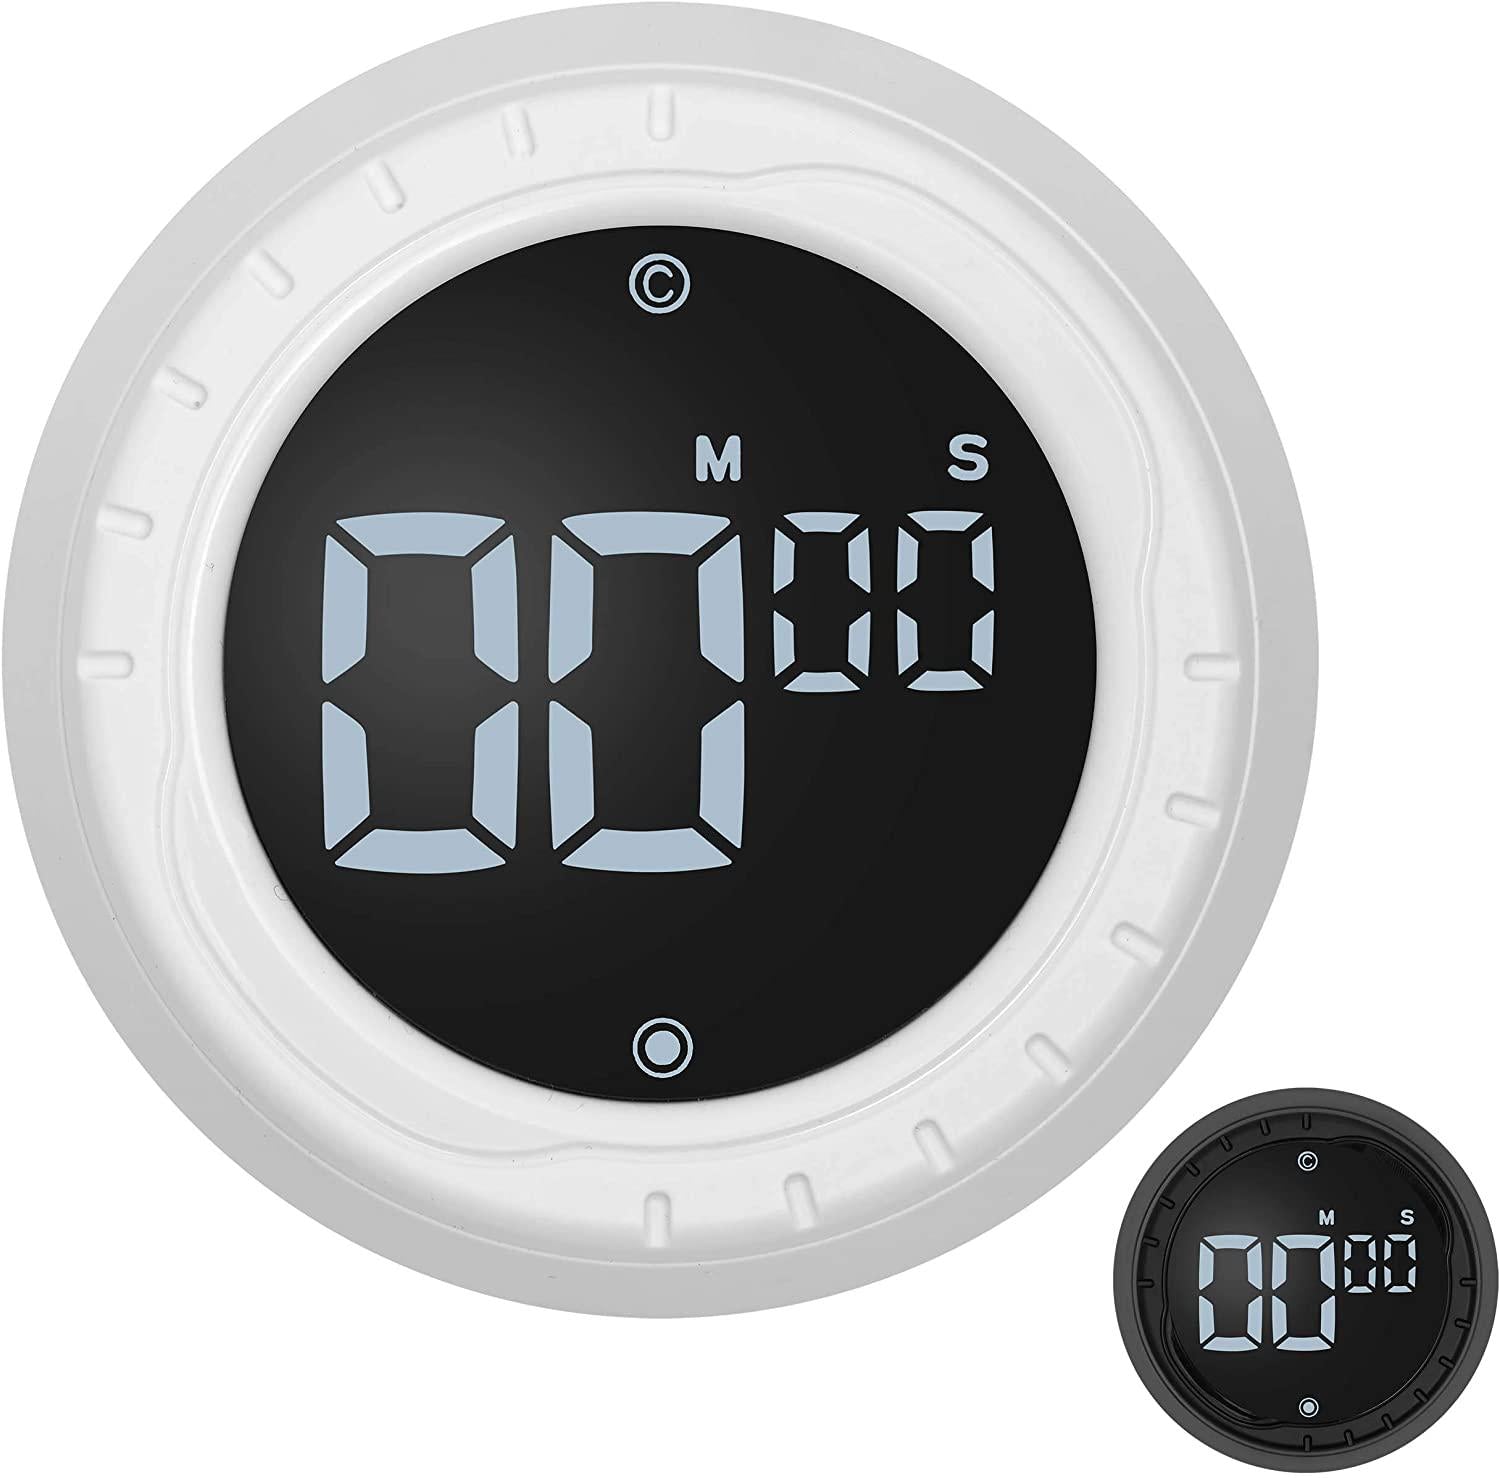 Baldr Home + Kitchen, Kitchen Timer (White) LED Digital Magnetic Timer and Countdown Quick and Easy, Twist Setting, Mute and 3 Levels Alarm Timer for Kids, Games, Cooking, Bathroom, Classroom, Teachers, Study